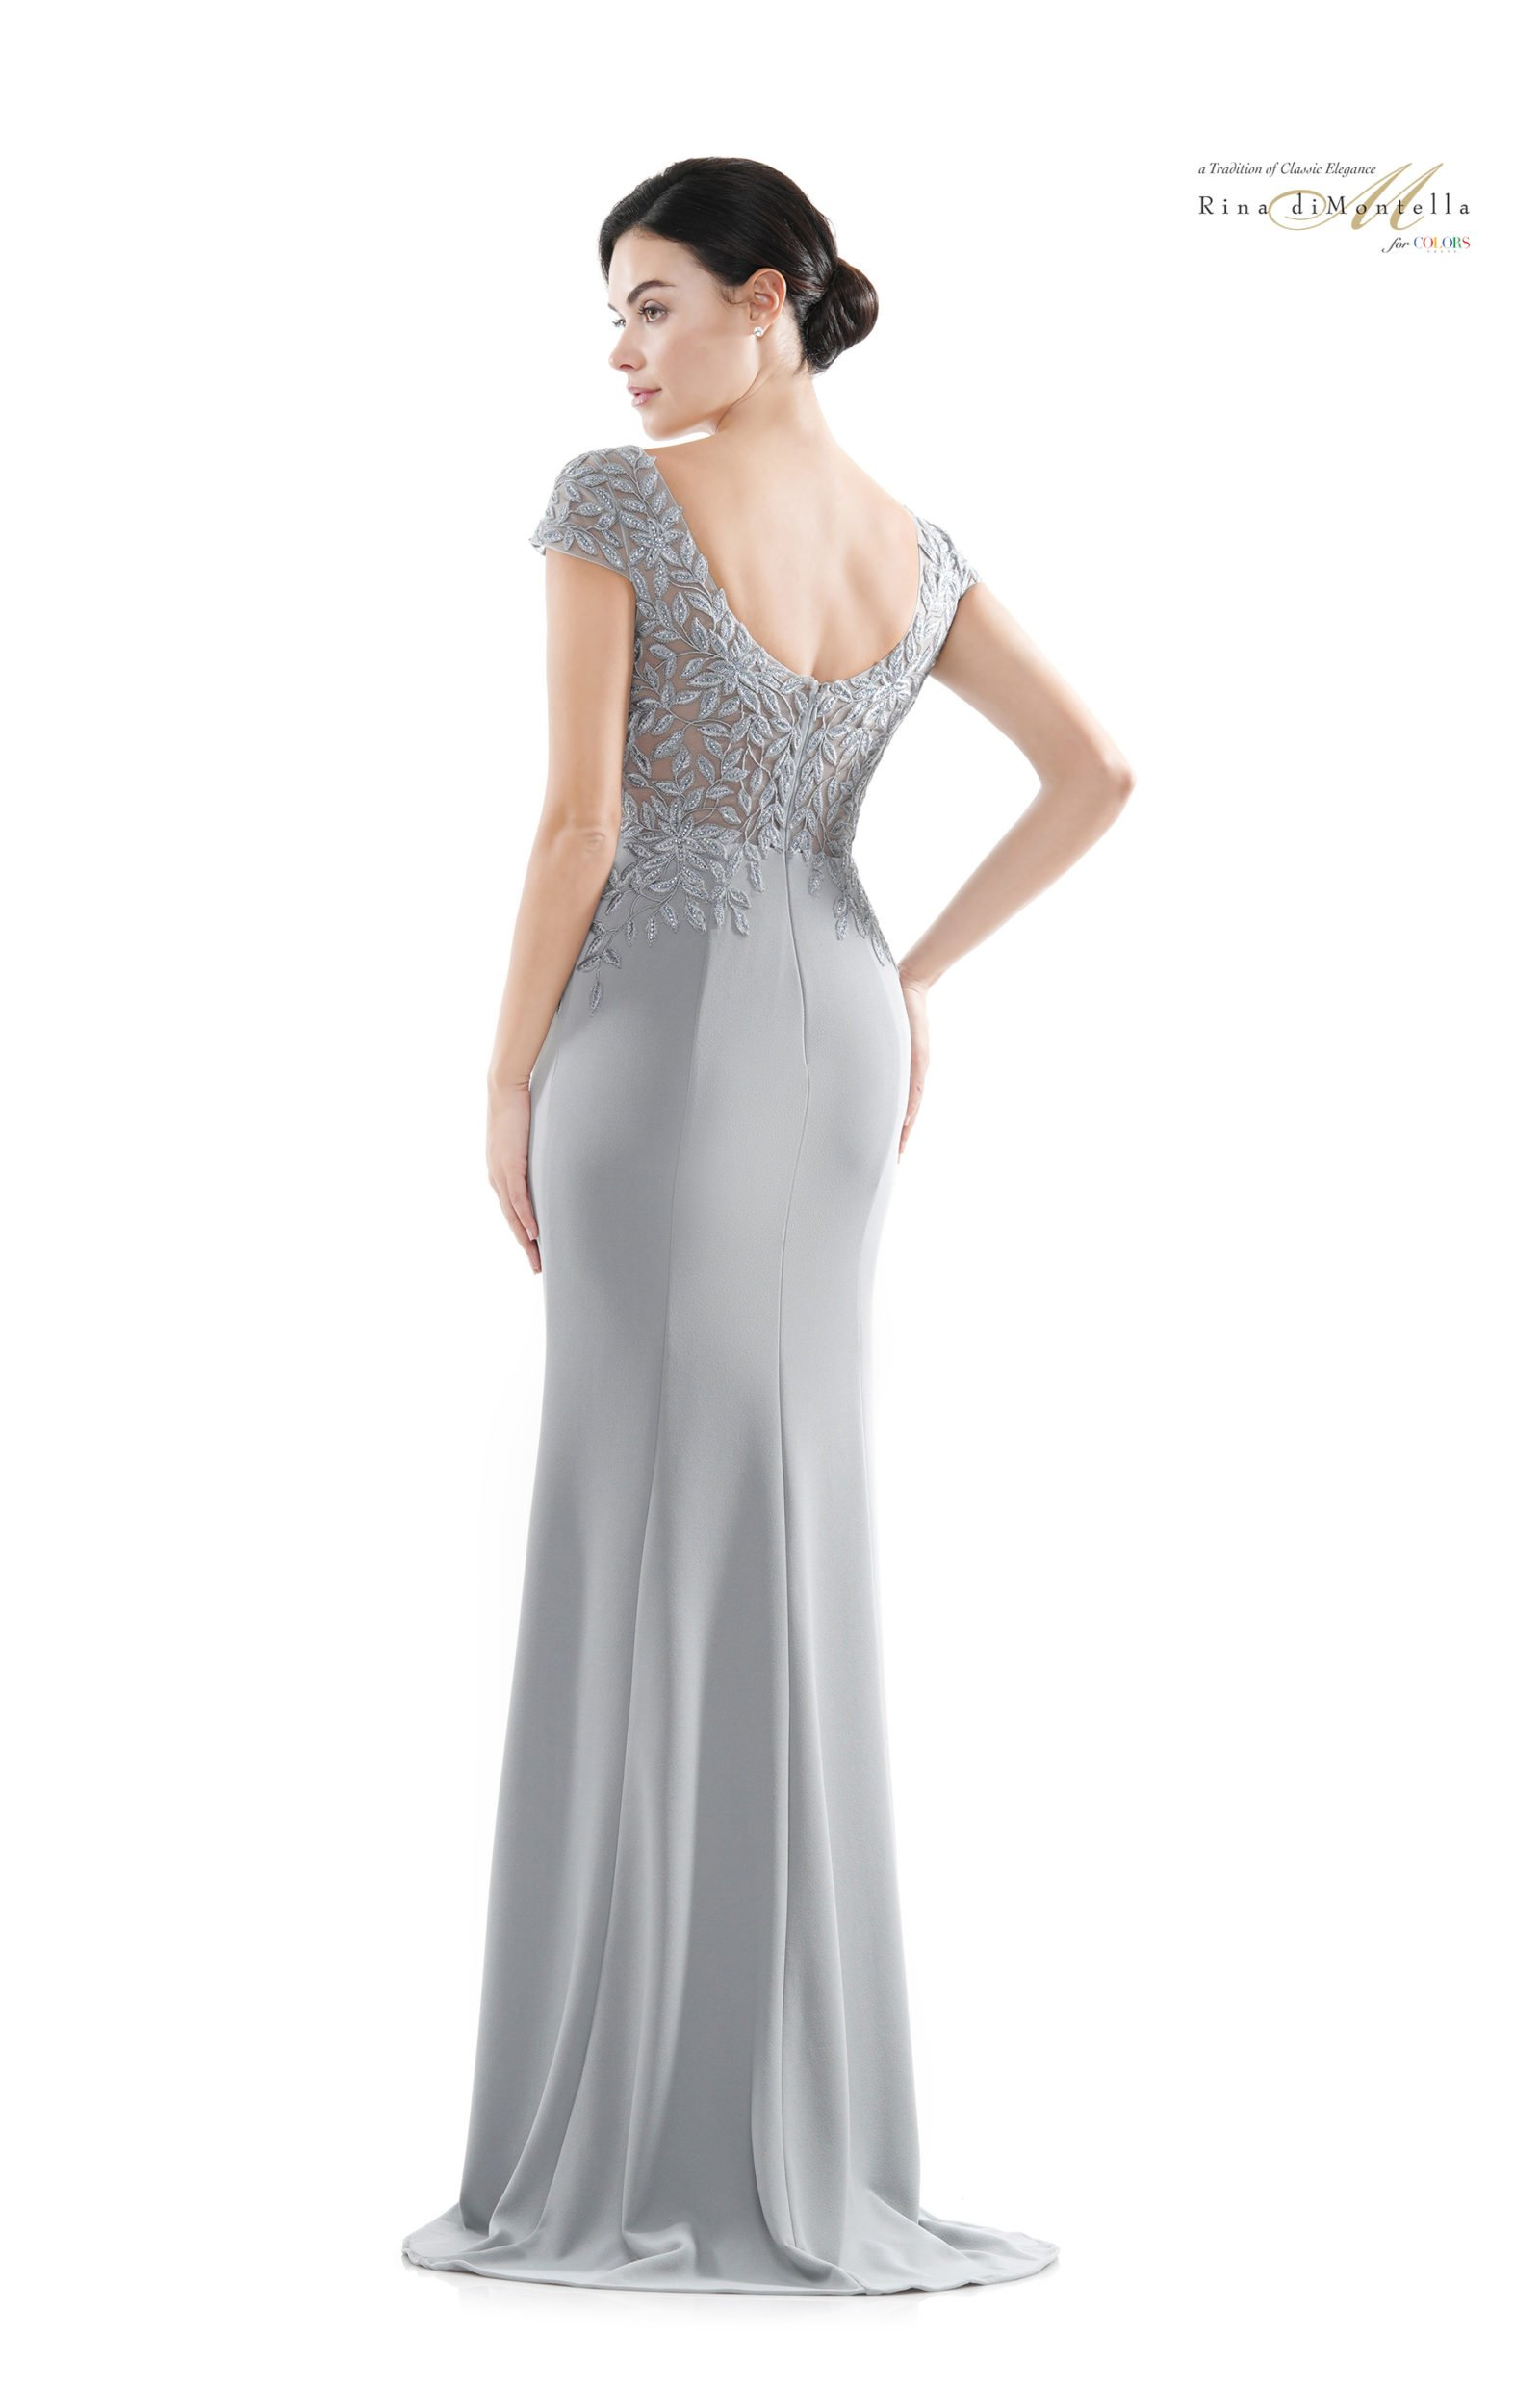 grey mother of the bride dress, silver mothers dress, rina di montella mothers, mother's dress, mothers dresses, mother of the bride, mother of the bride dresses, sexy mother of the bride dresses, mother of the bride dresses near me,